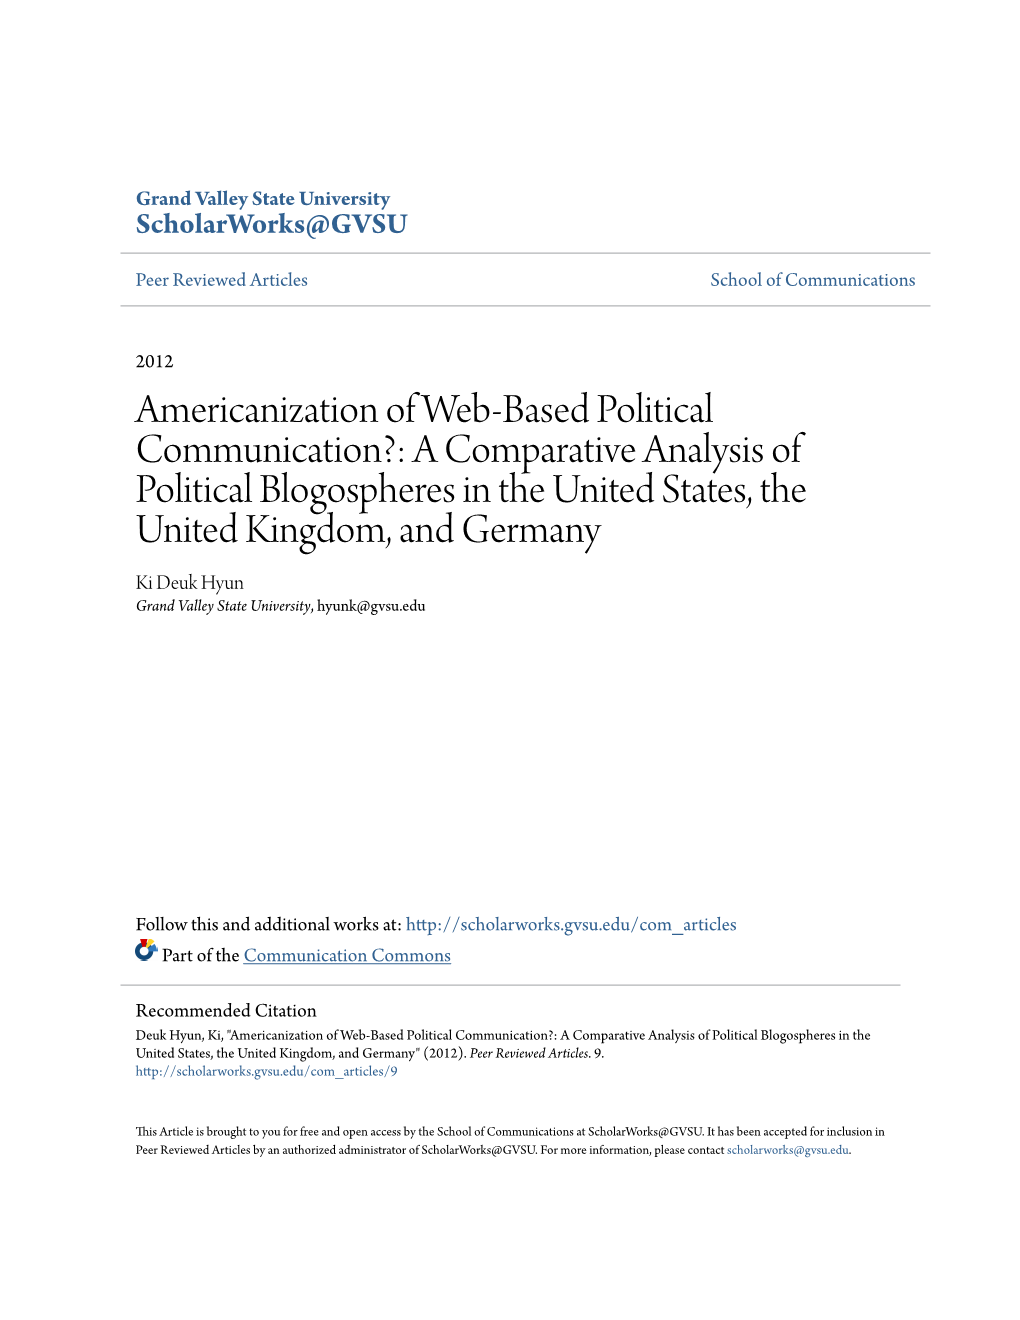 Americanization of Web-Based Political Communication?: a Comparative Analysis of Political Blogospheres in the United States, Th